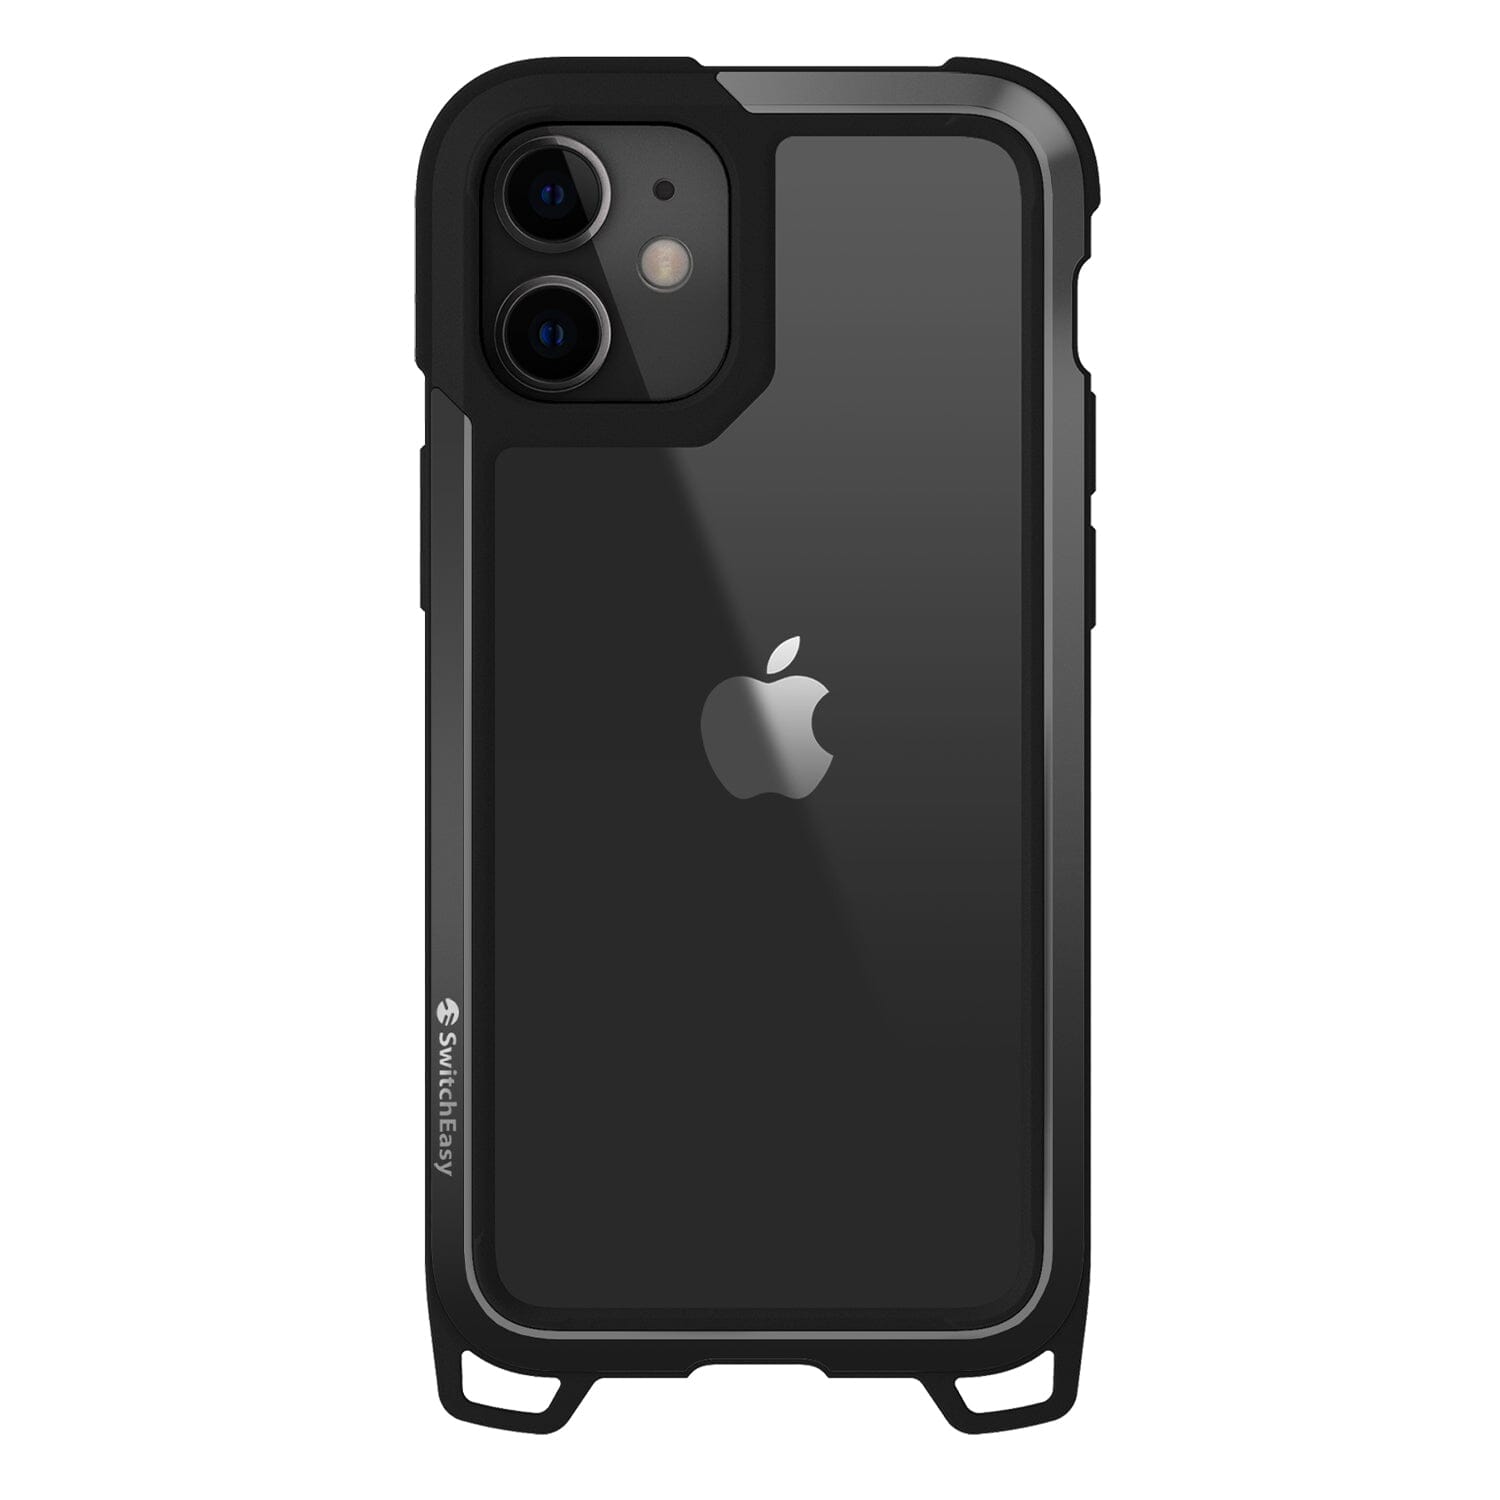 SwitchEasy Odyssey Case for iPhone 12 Series iPhone 12 Series SwitchEasy Black iPhone 12 Mini 5.4" 